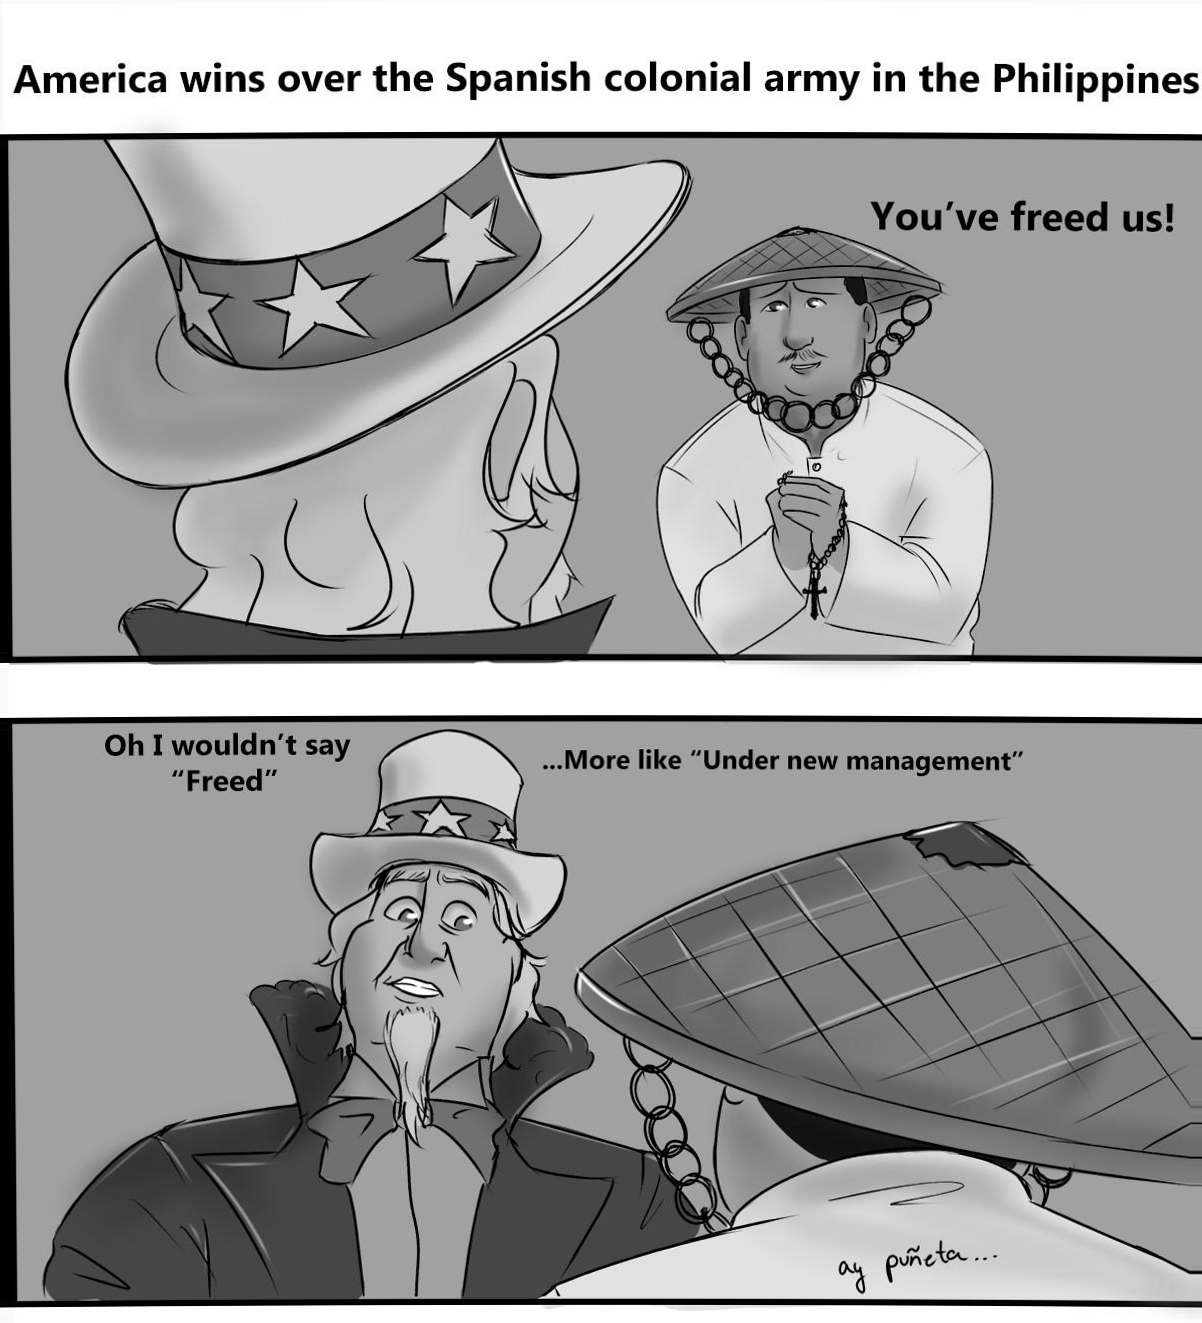 Imperialism is fun